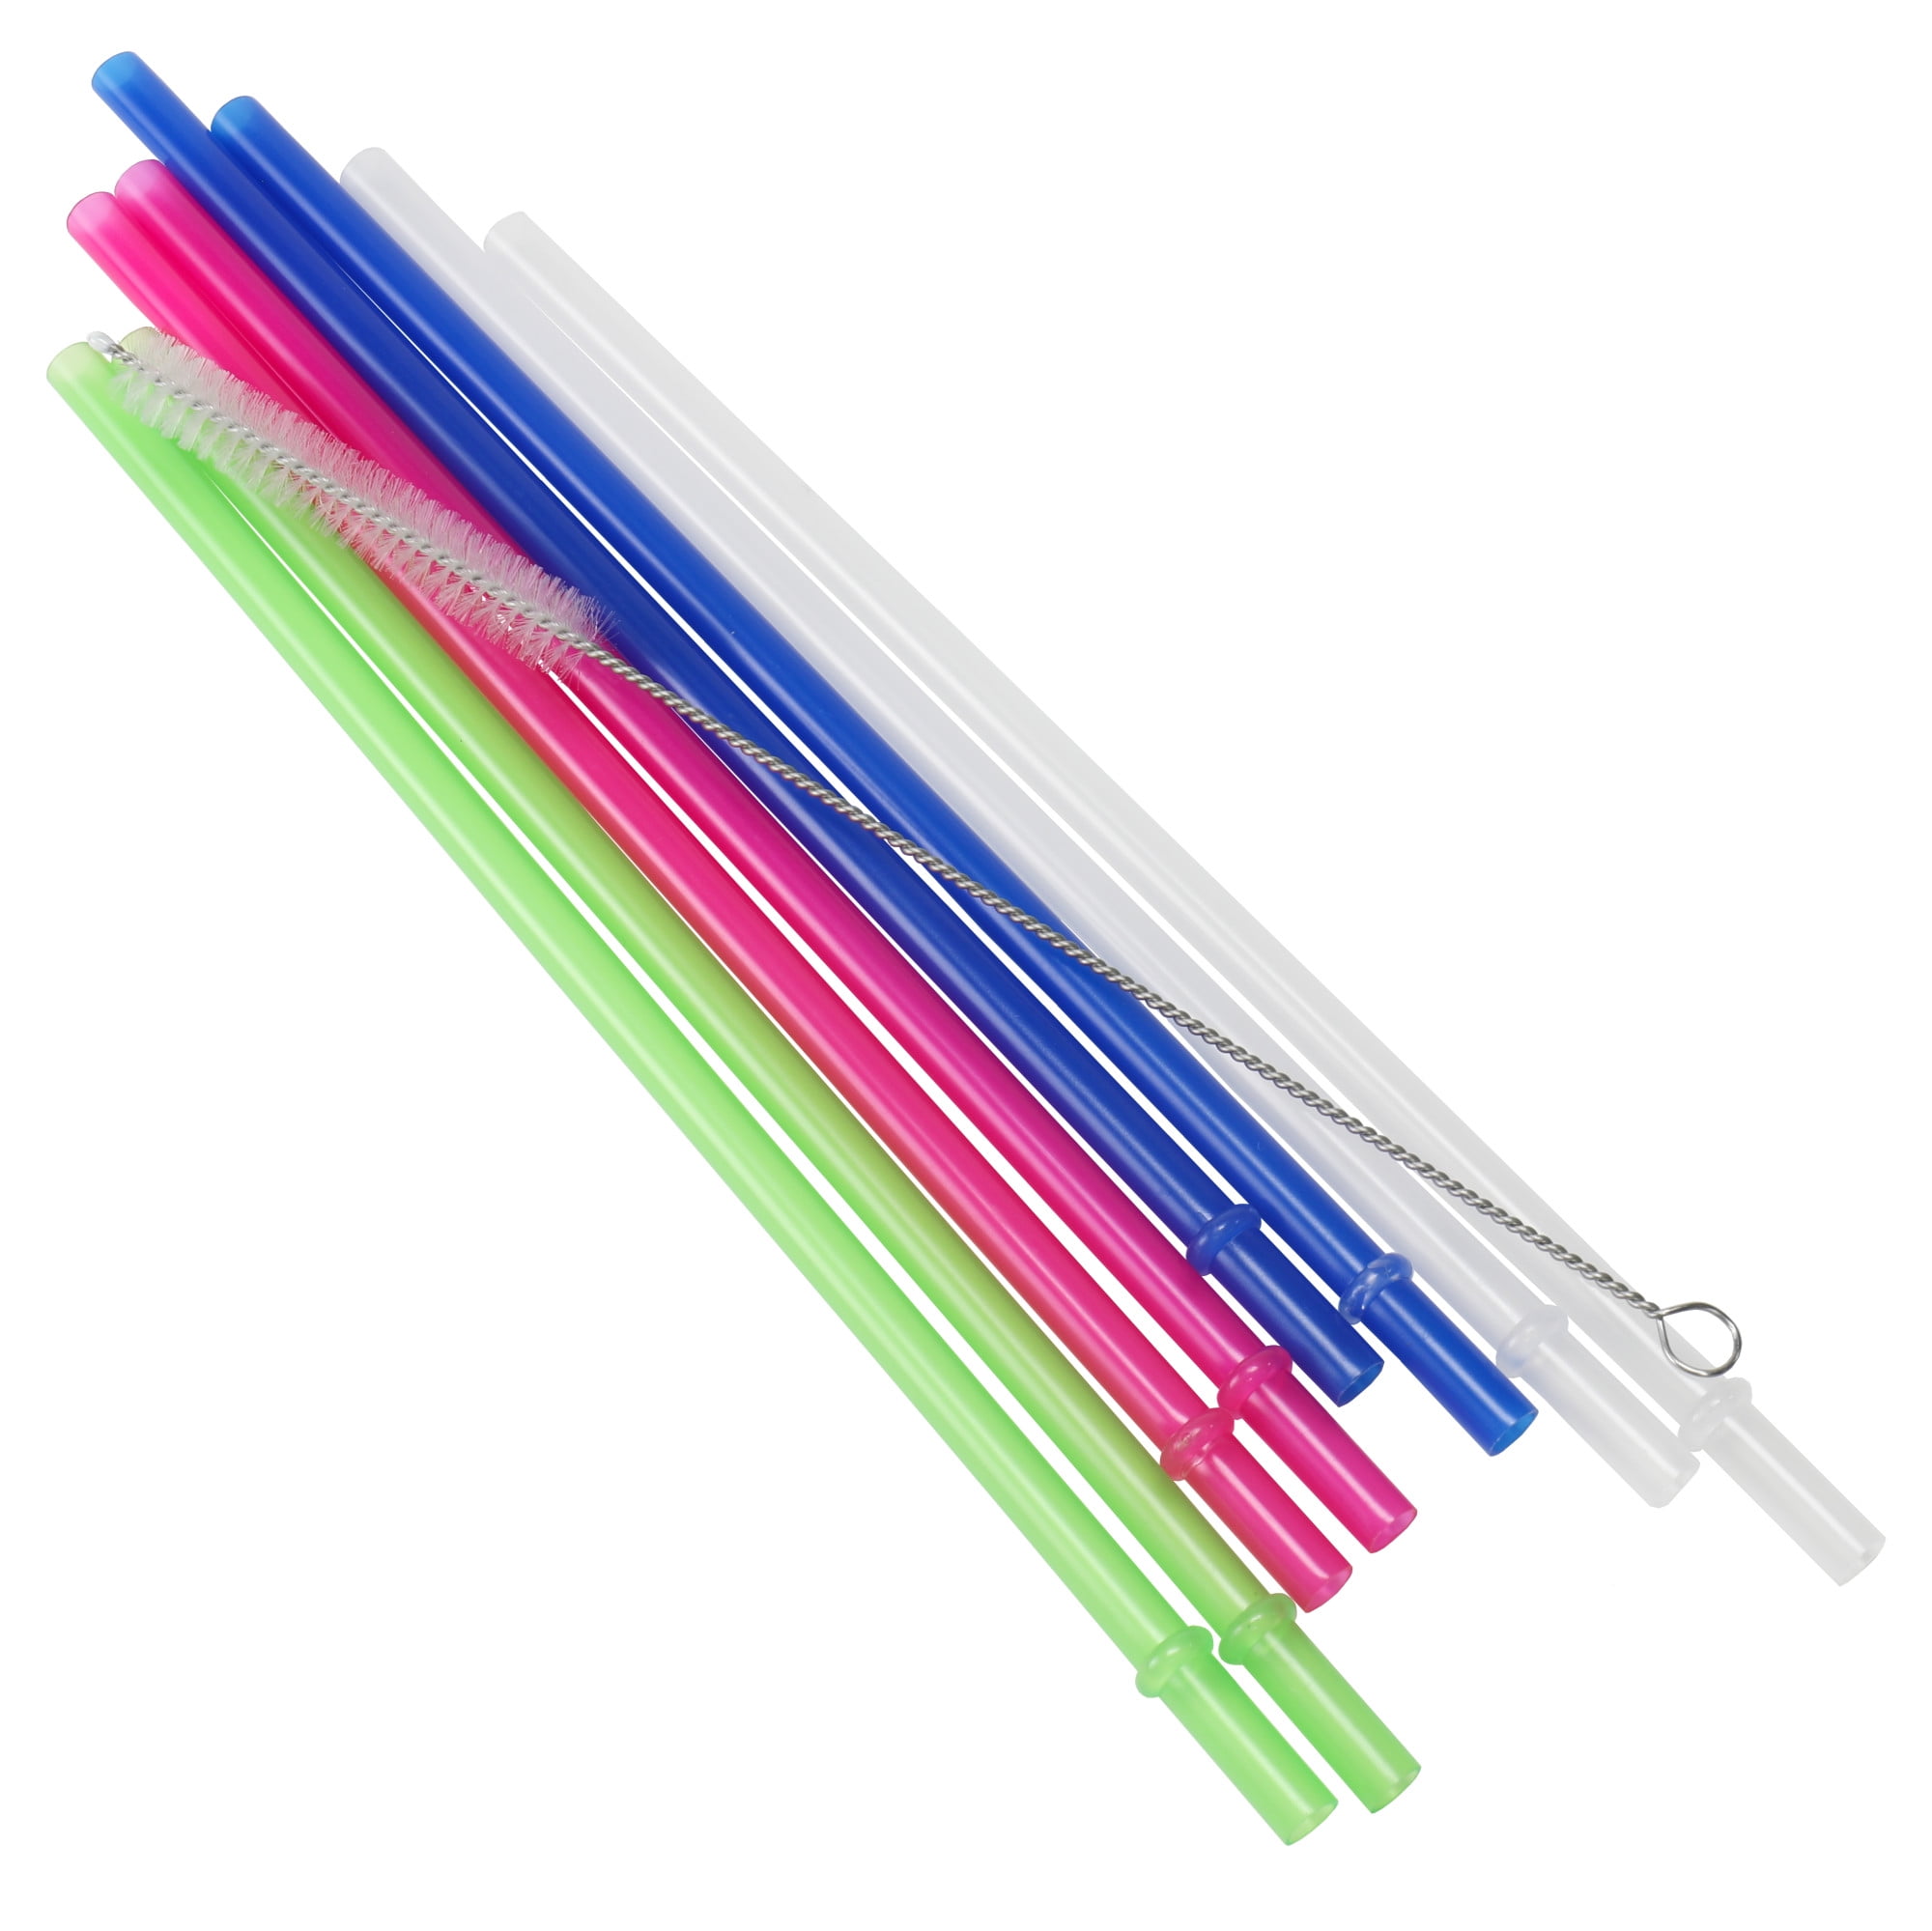 KOLORAE Drinking Straws - Reusable Plastic Straws With Assorted Colors And  Cleaning Brushes For Home, School, Kids, Work, Dishwasher Safe (6 Packs Of